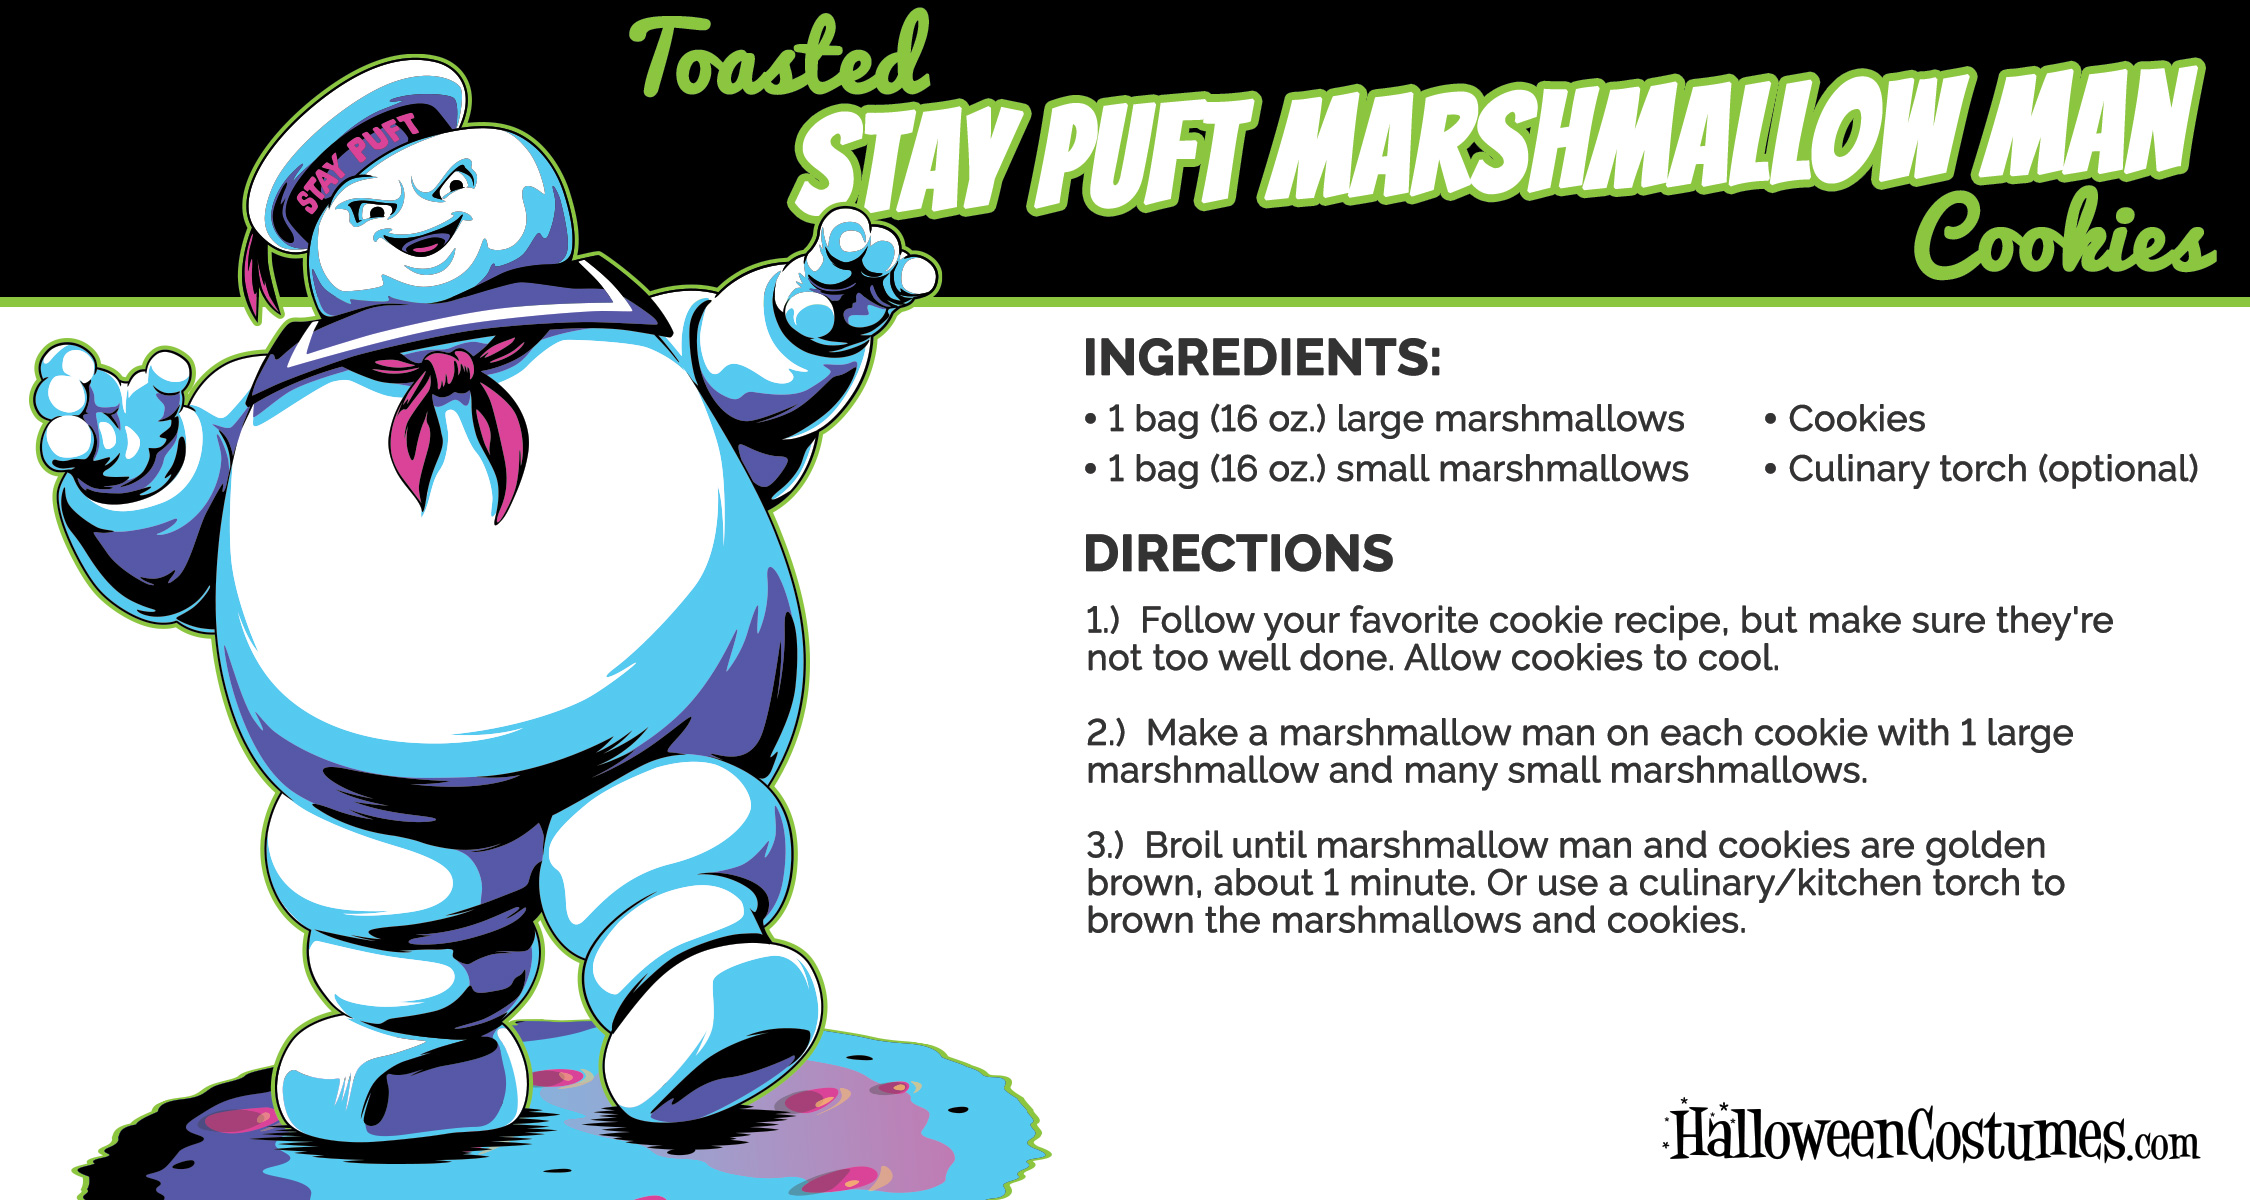 Toasted Stay Puft Marshmallow Man Cookies